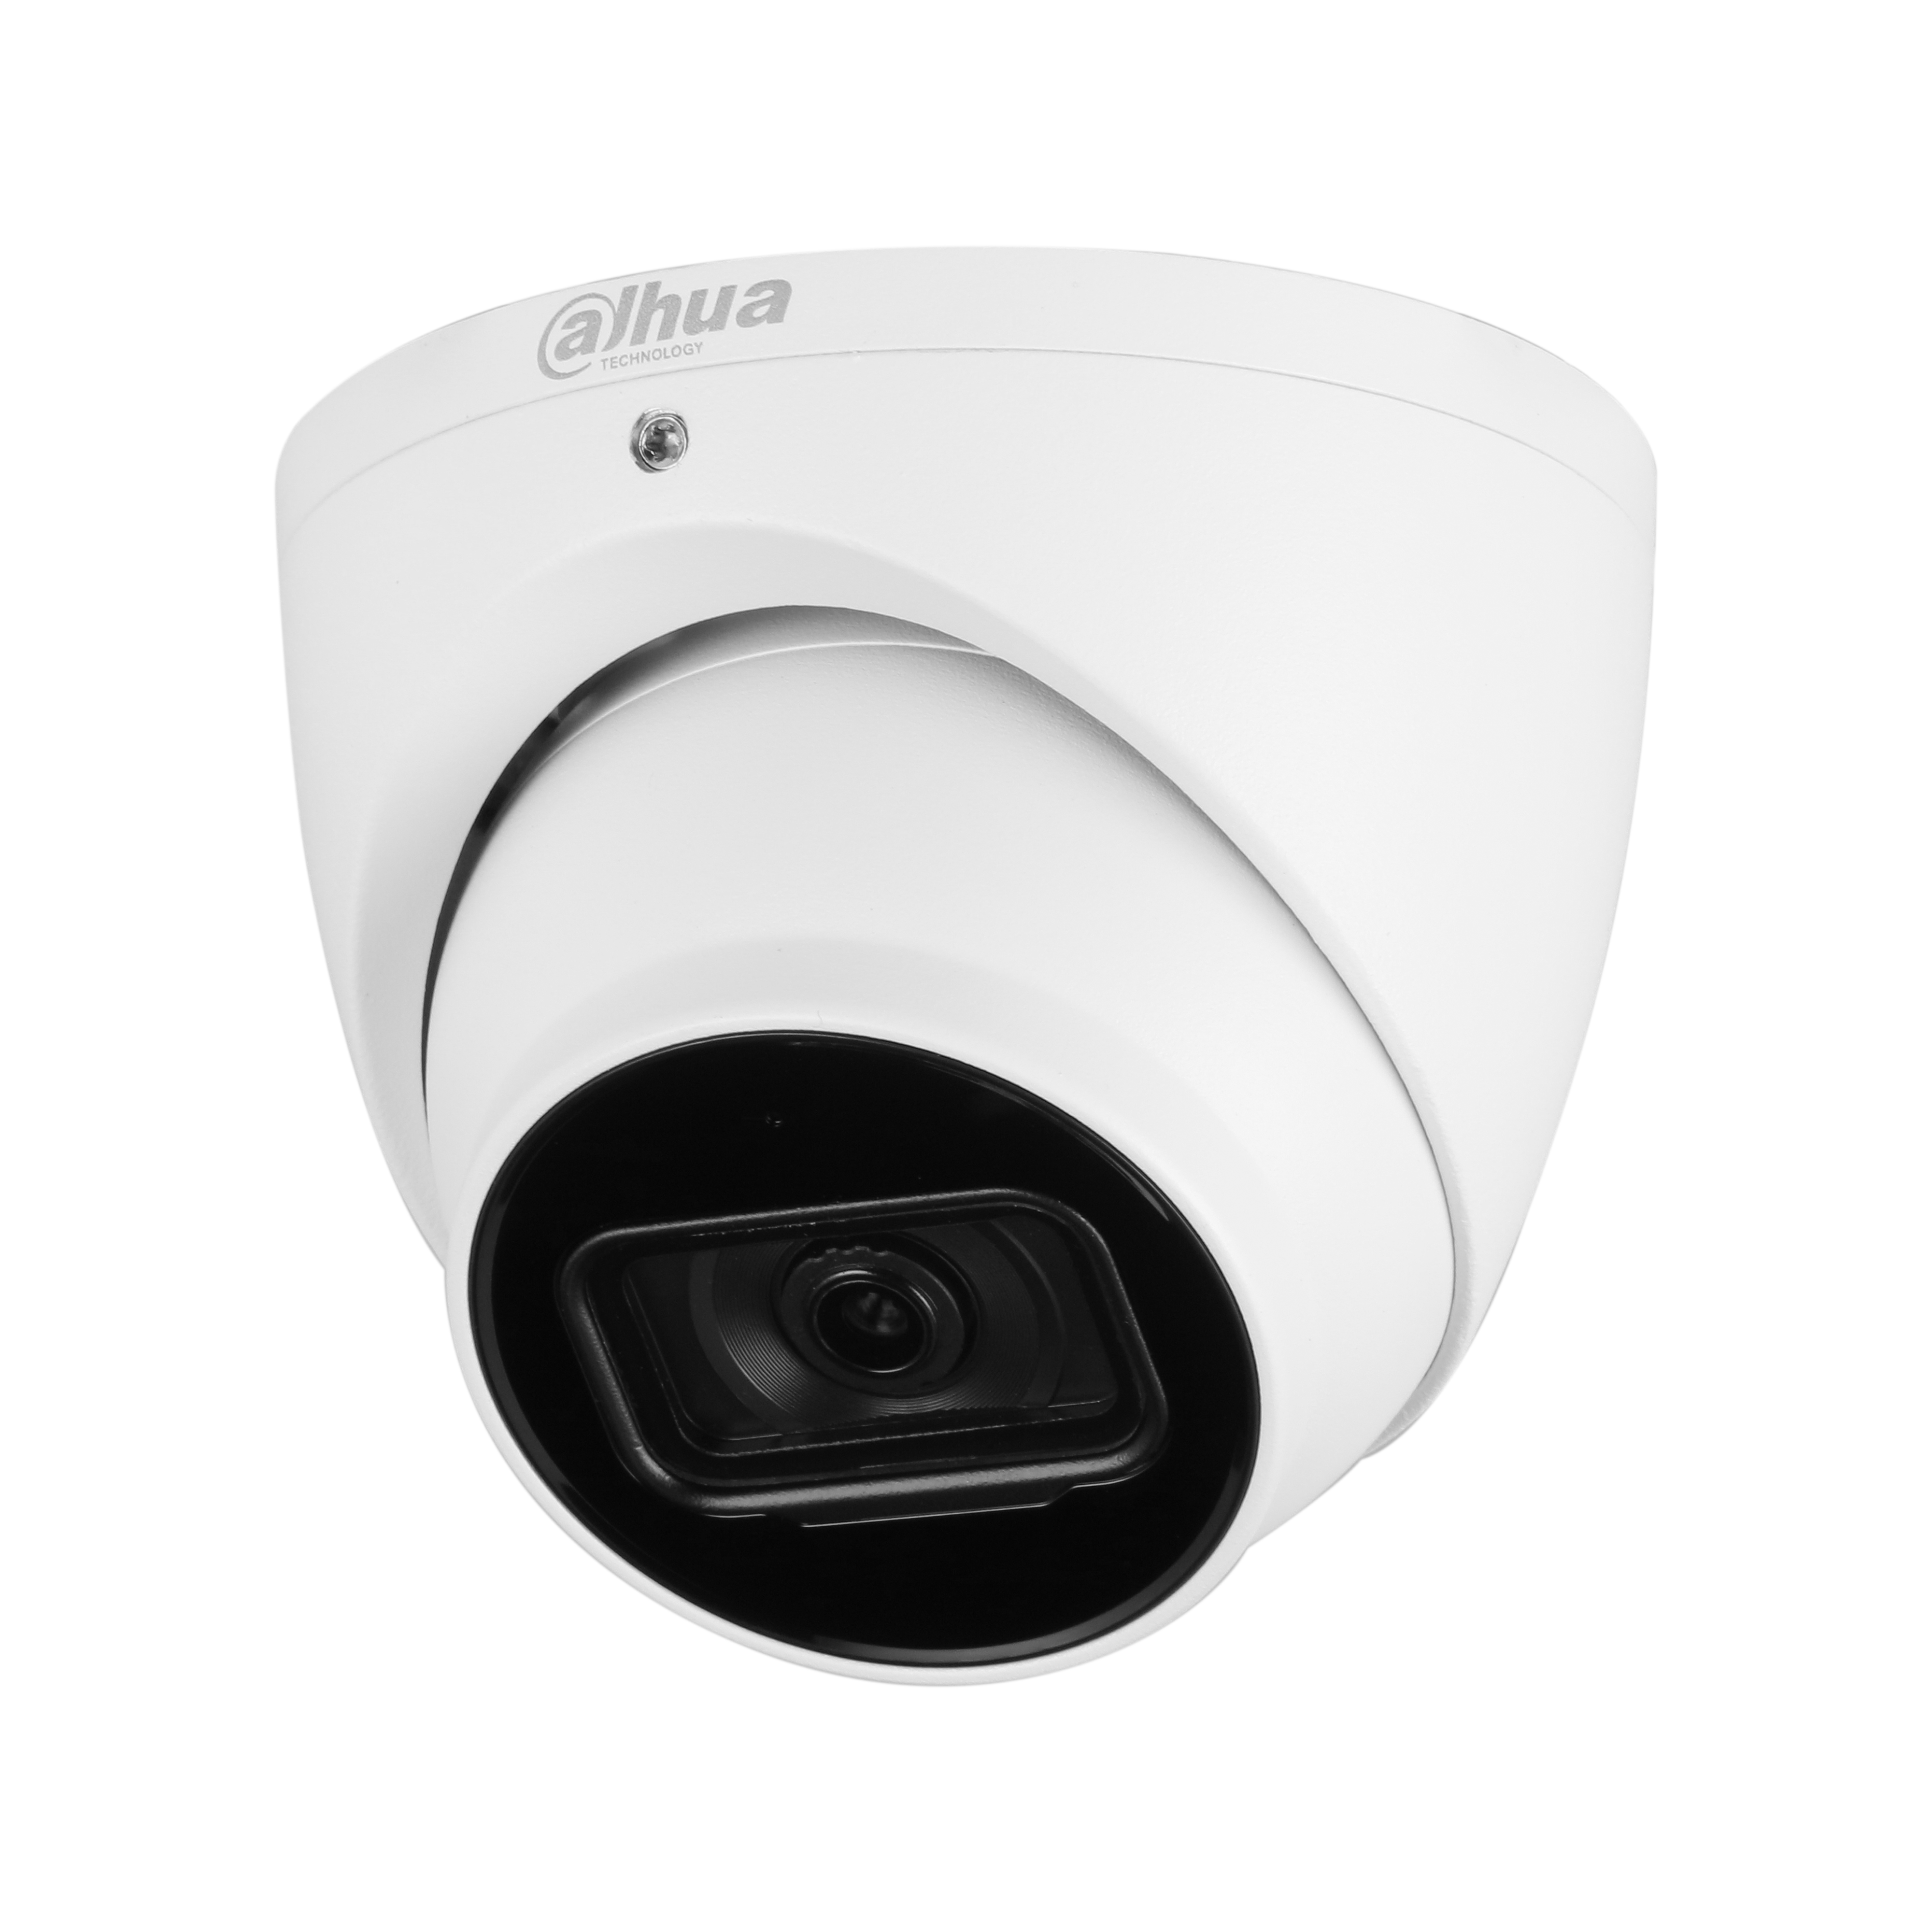 WIZSENSE SERIES IP CAMERA WHITE AI 4MP H.264/4+/5/5+ TURRET 120 WDR METAL 2.8MM FIXED LENS STARLIGHT IR 50M POE IP67 BUILT IN MIC SUPPORT UP TO 256GB SD 12VDC